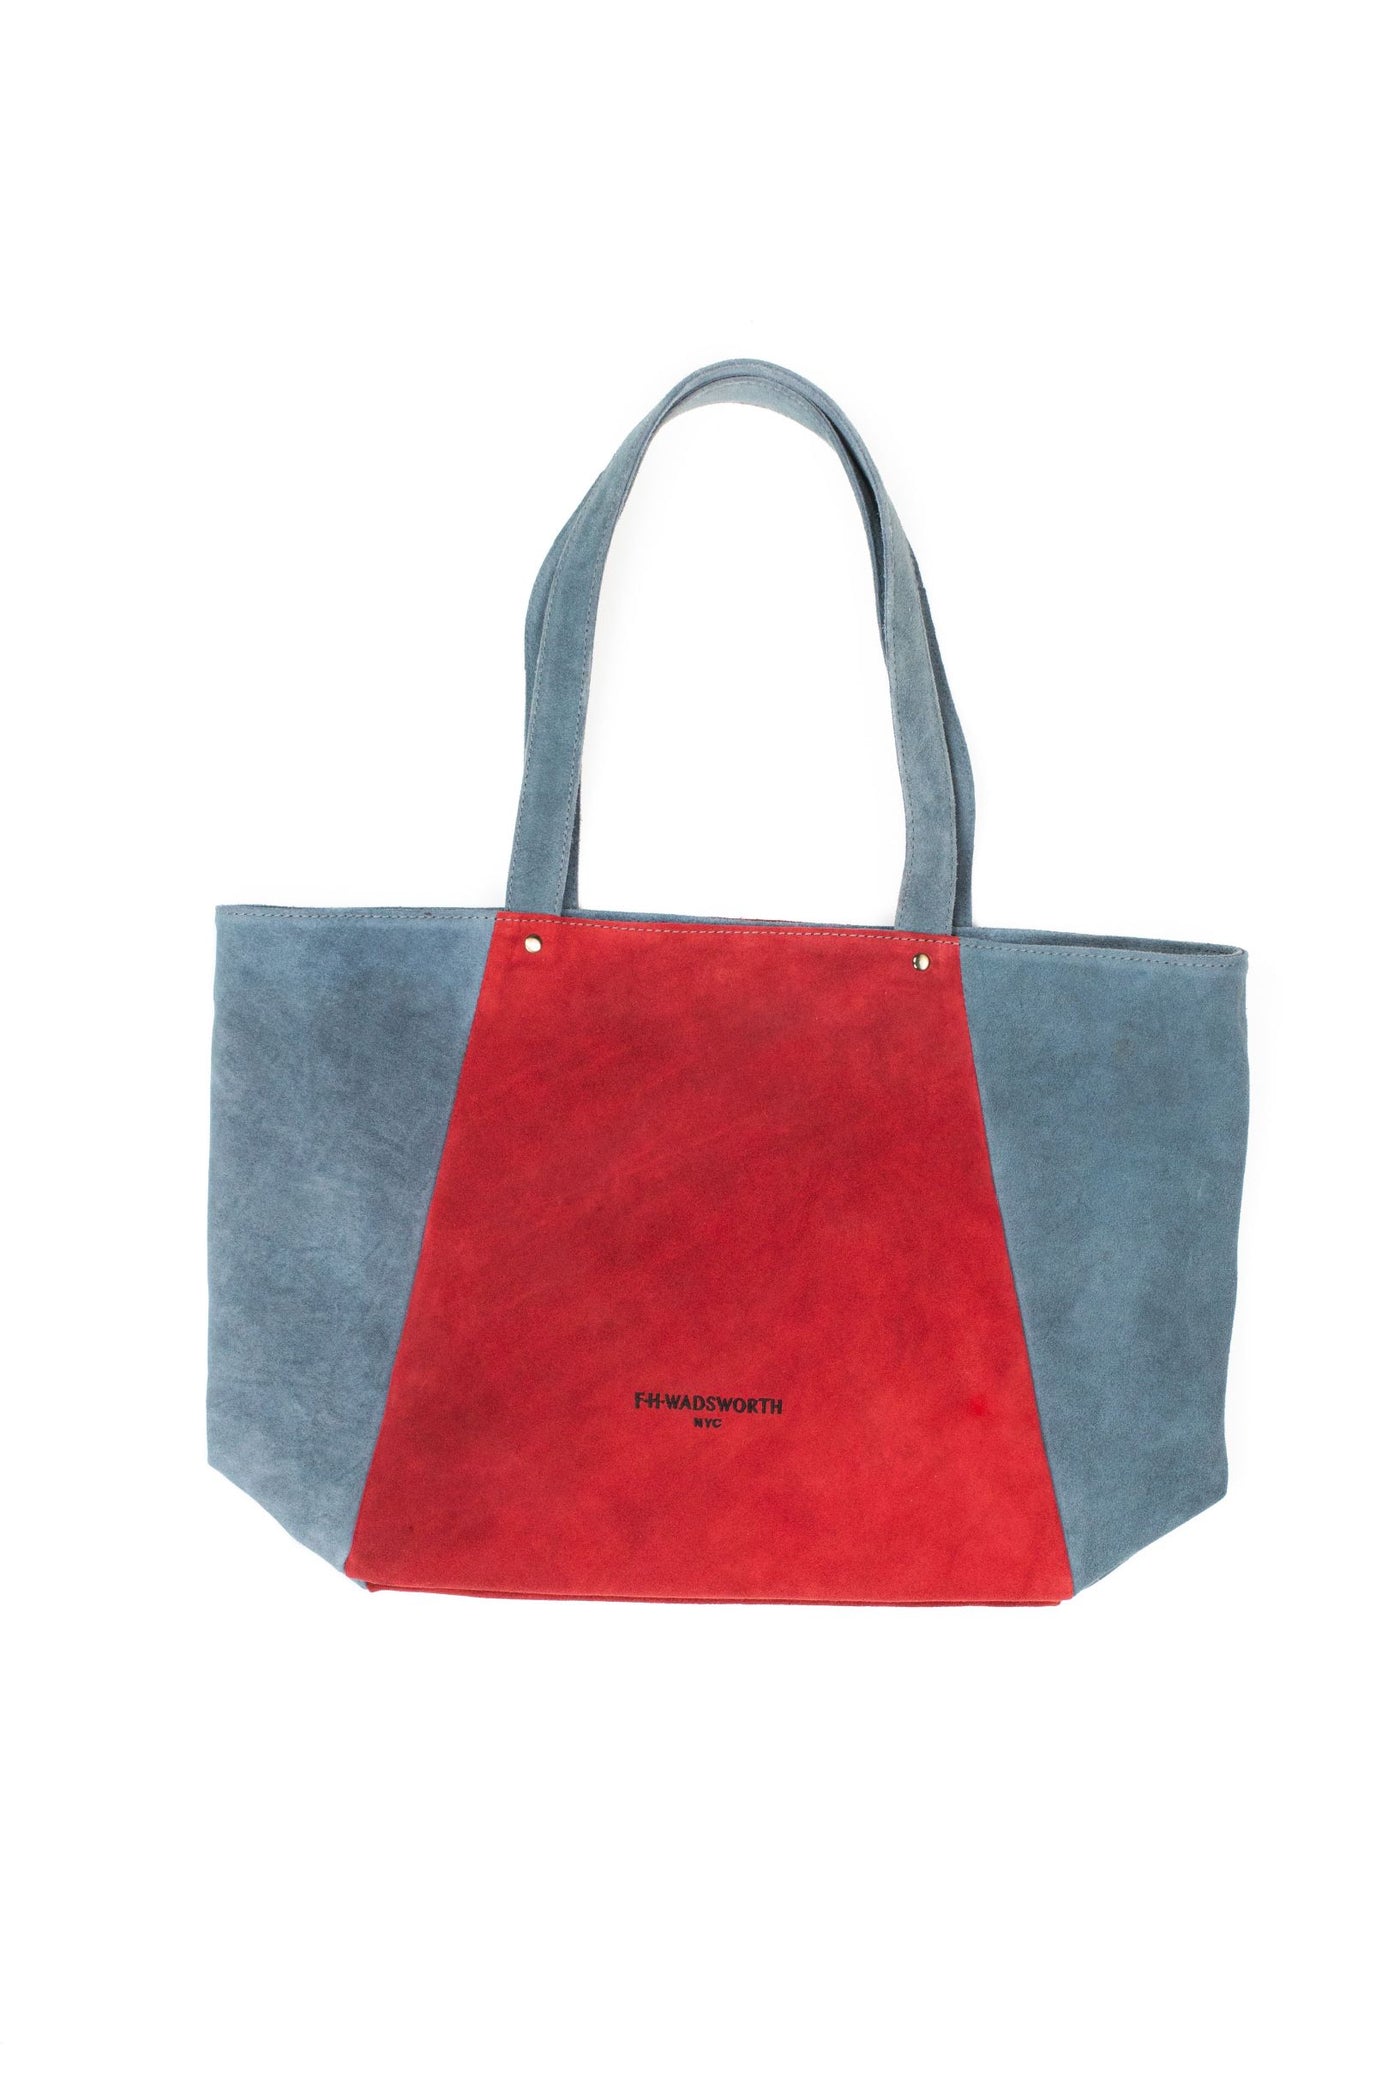 FH Wadsworth Suede Tote Bag